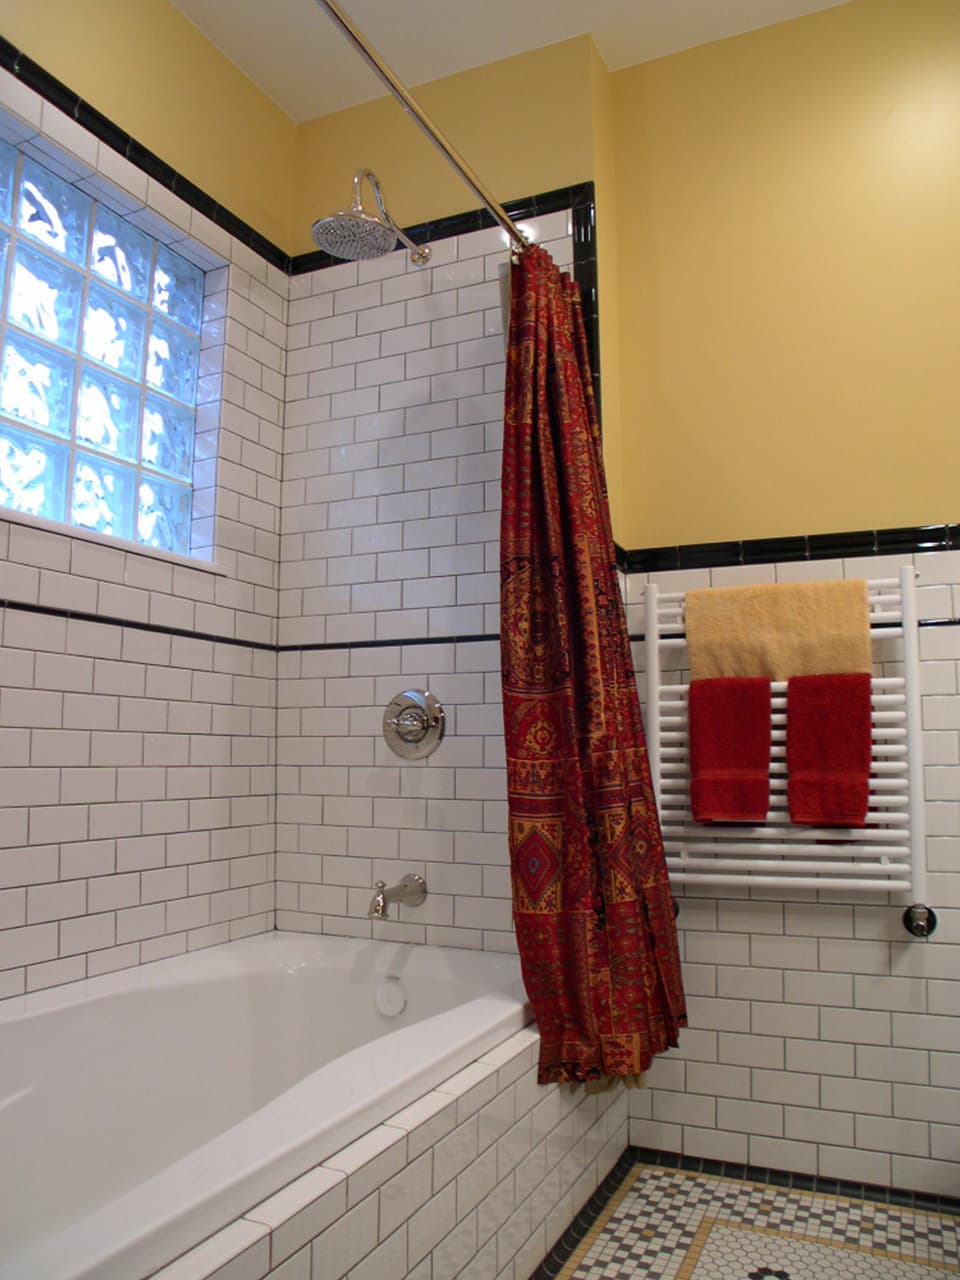 Picture of beautiful tile shower surround.